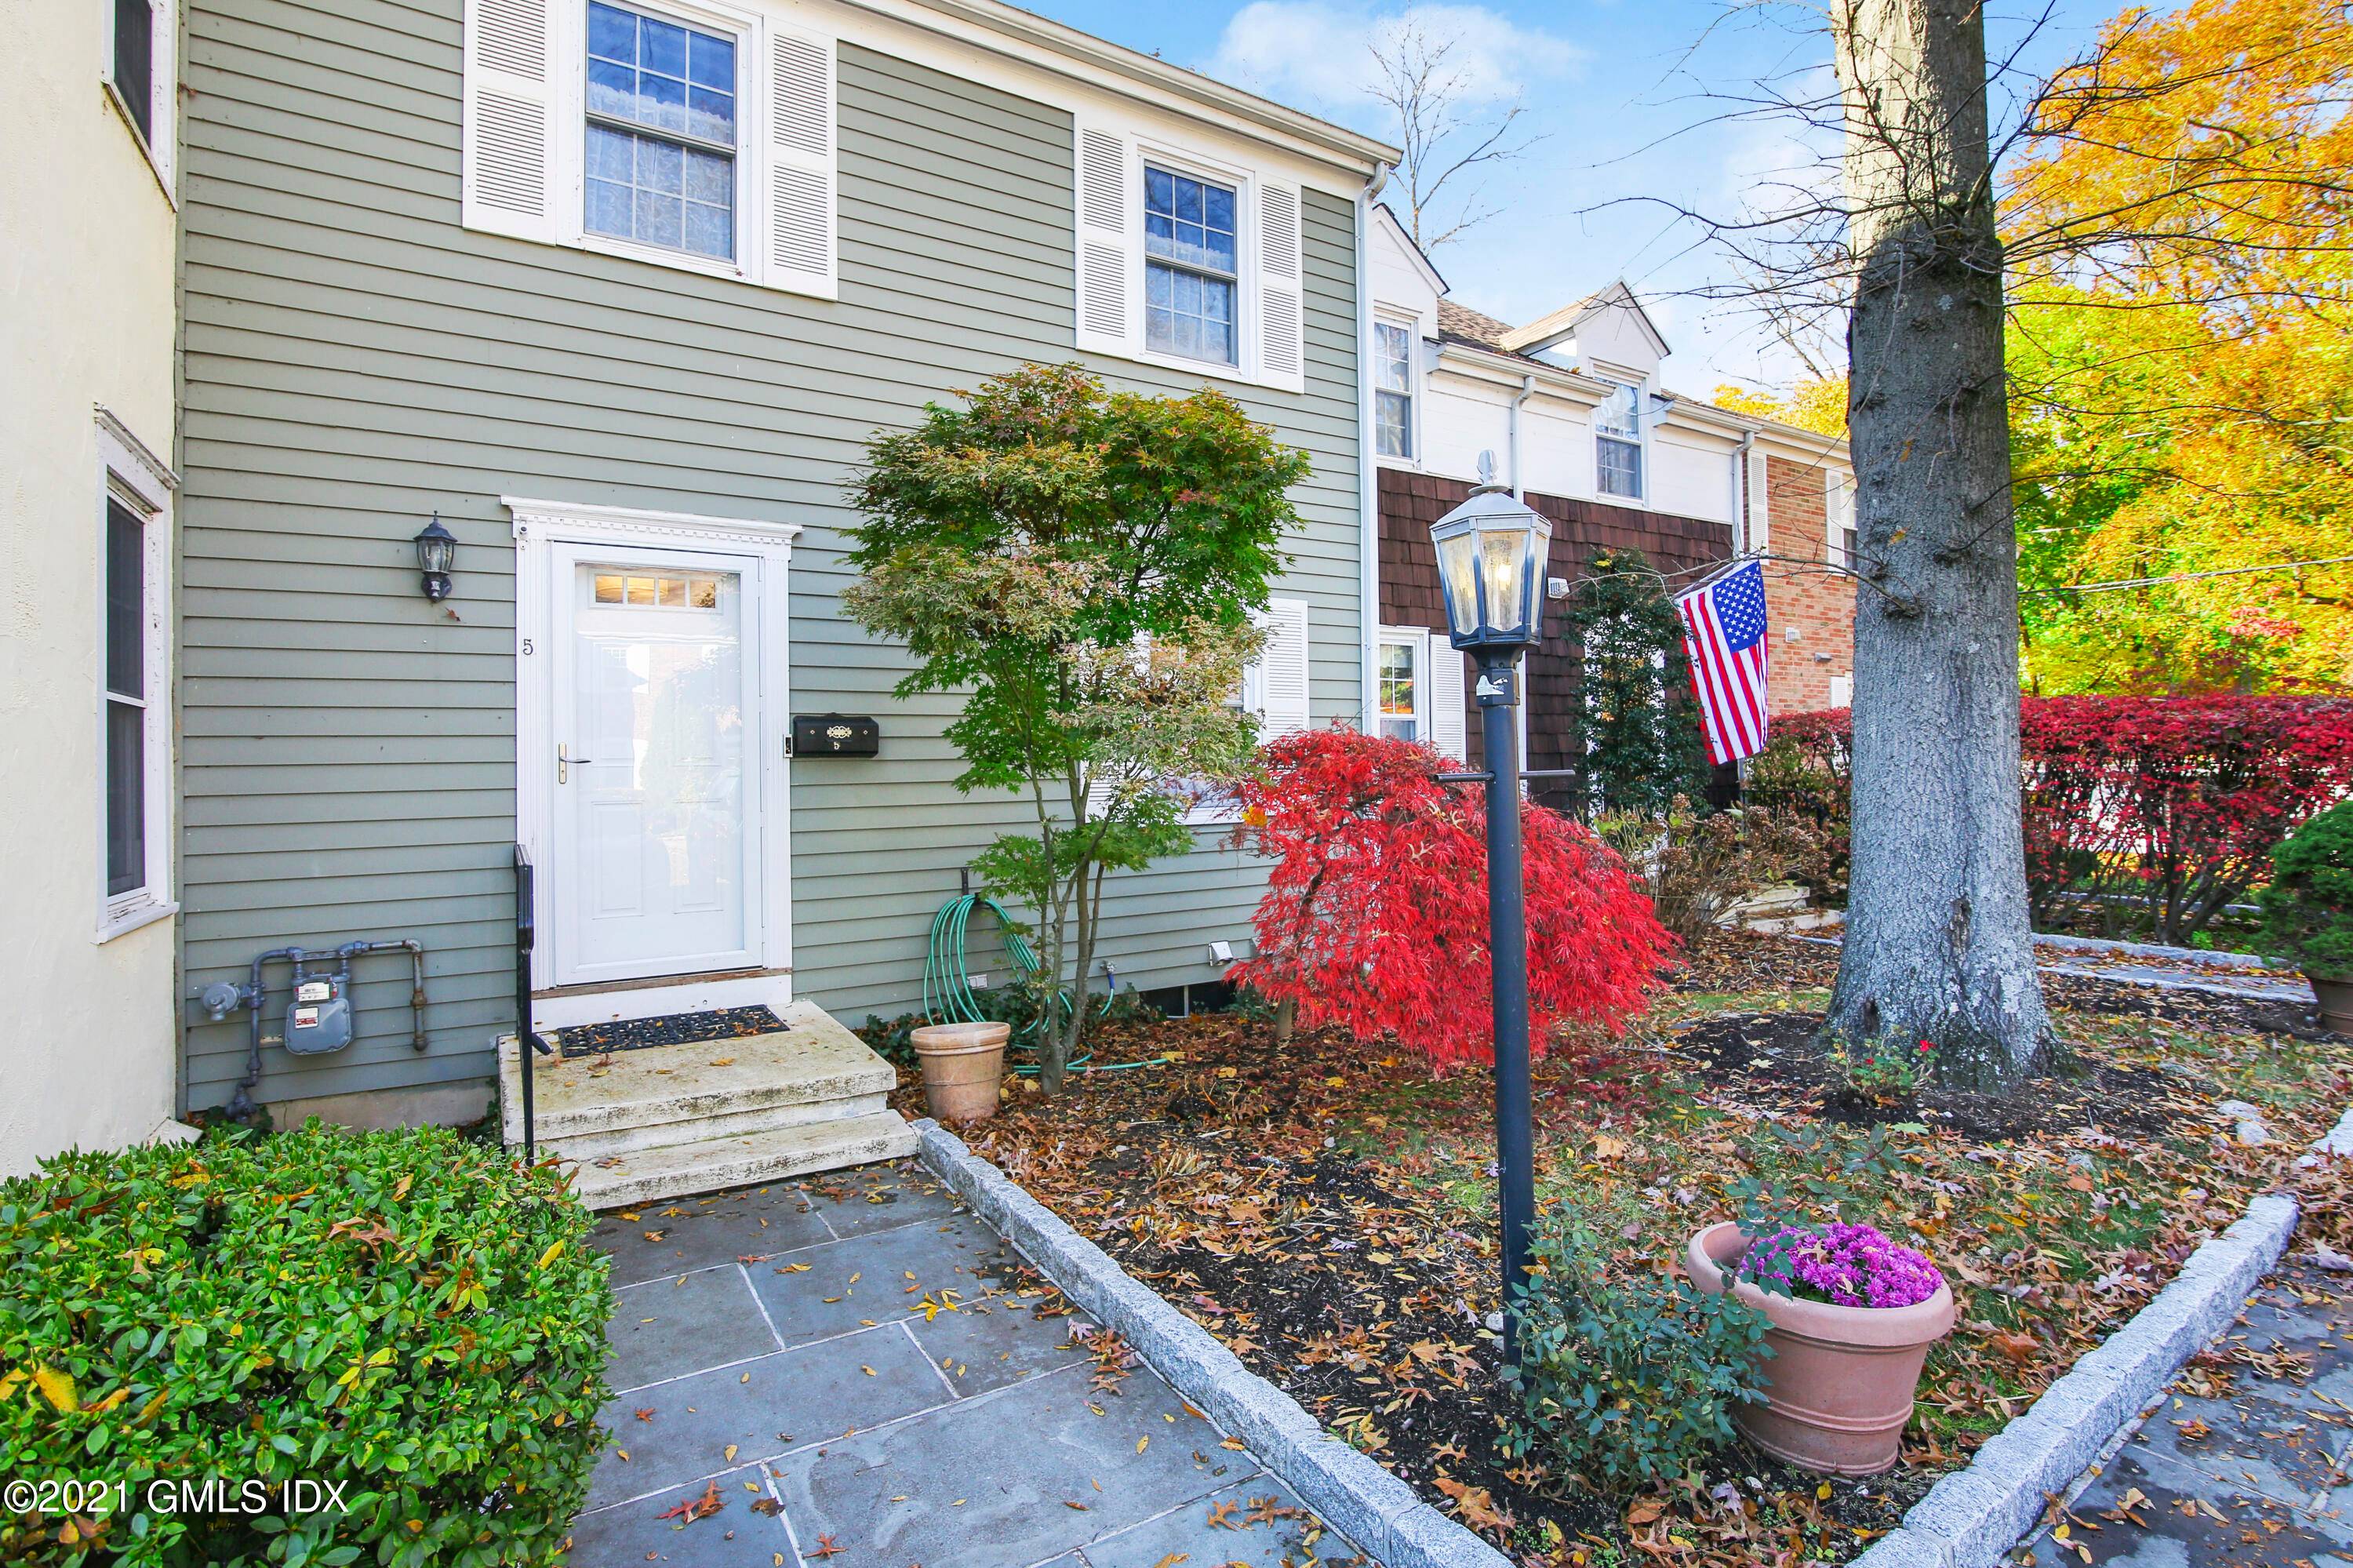 Turnkey three bedroom Townhome showcases a sunny interior with stone patio nestled in private, peaceful complex in a convenient Cos Cob location.